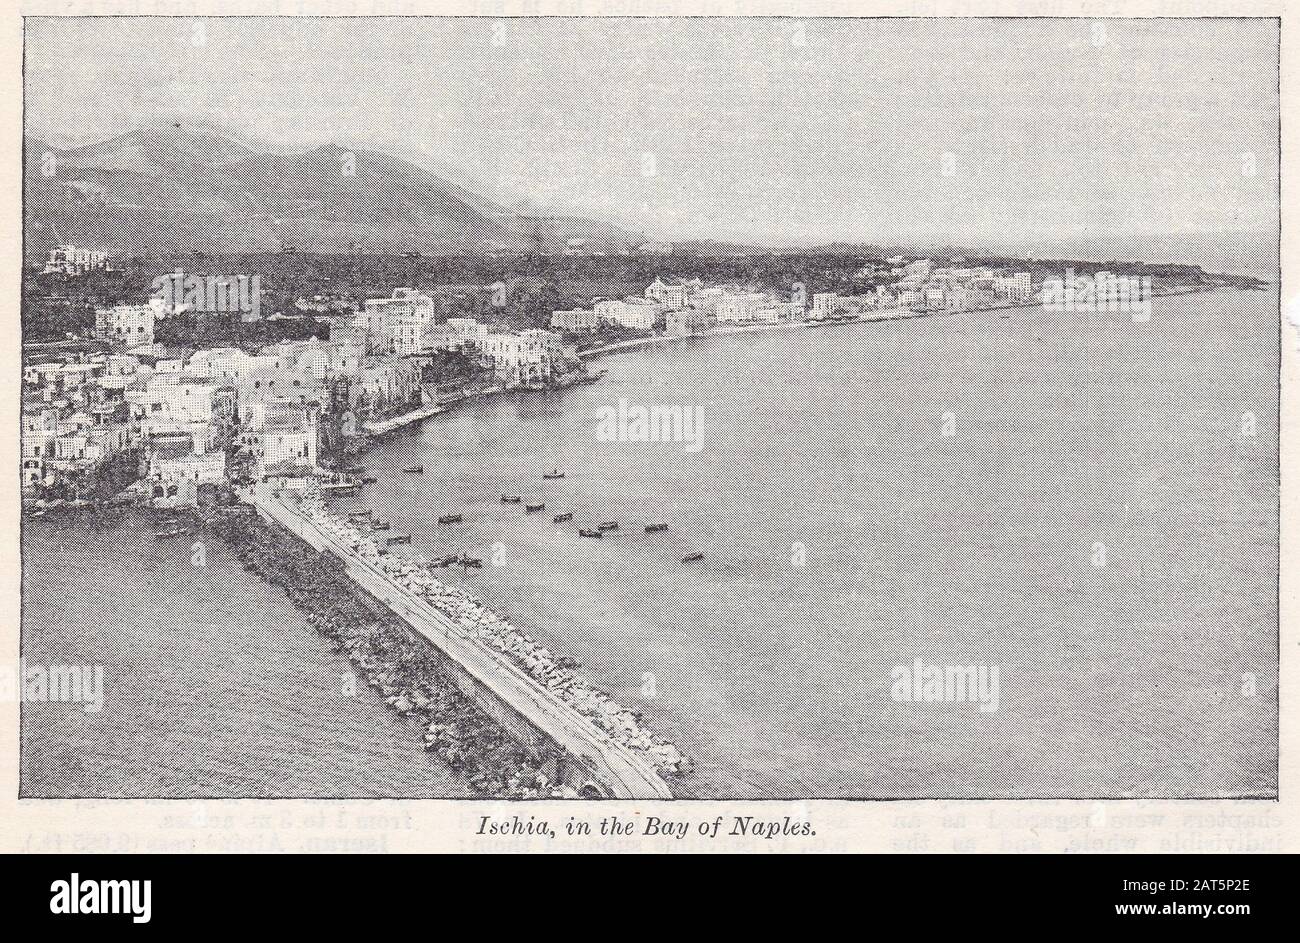 Vintage black and white photo of Ischia in the Bay of Naples Stock Photo